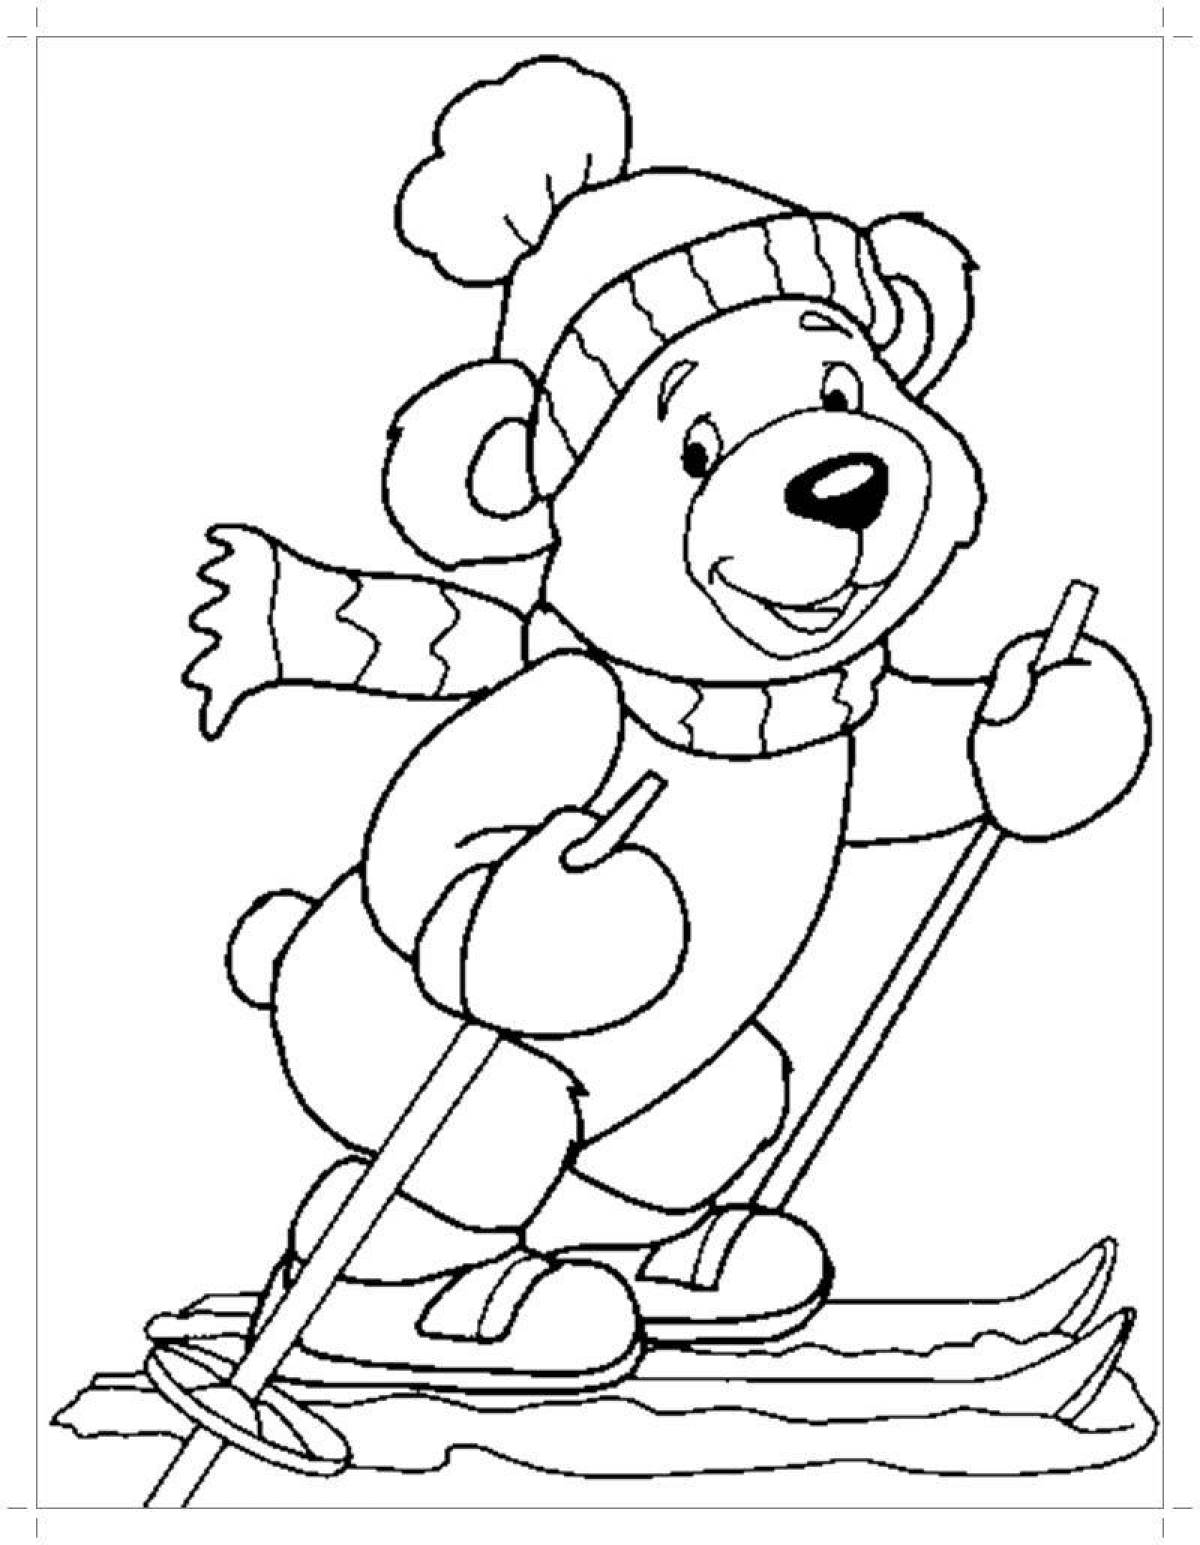 Coloring page adorable skier for kids